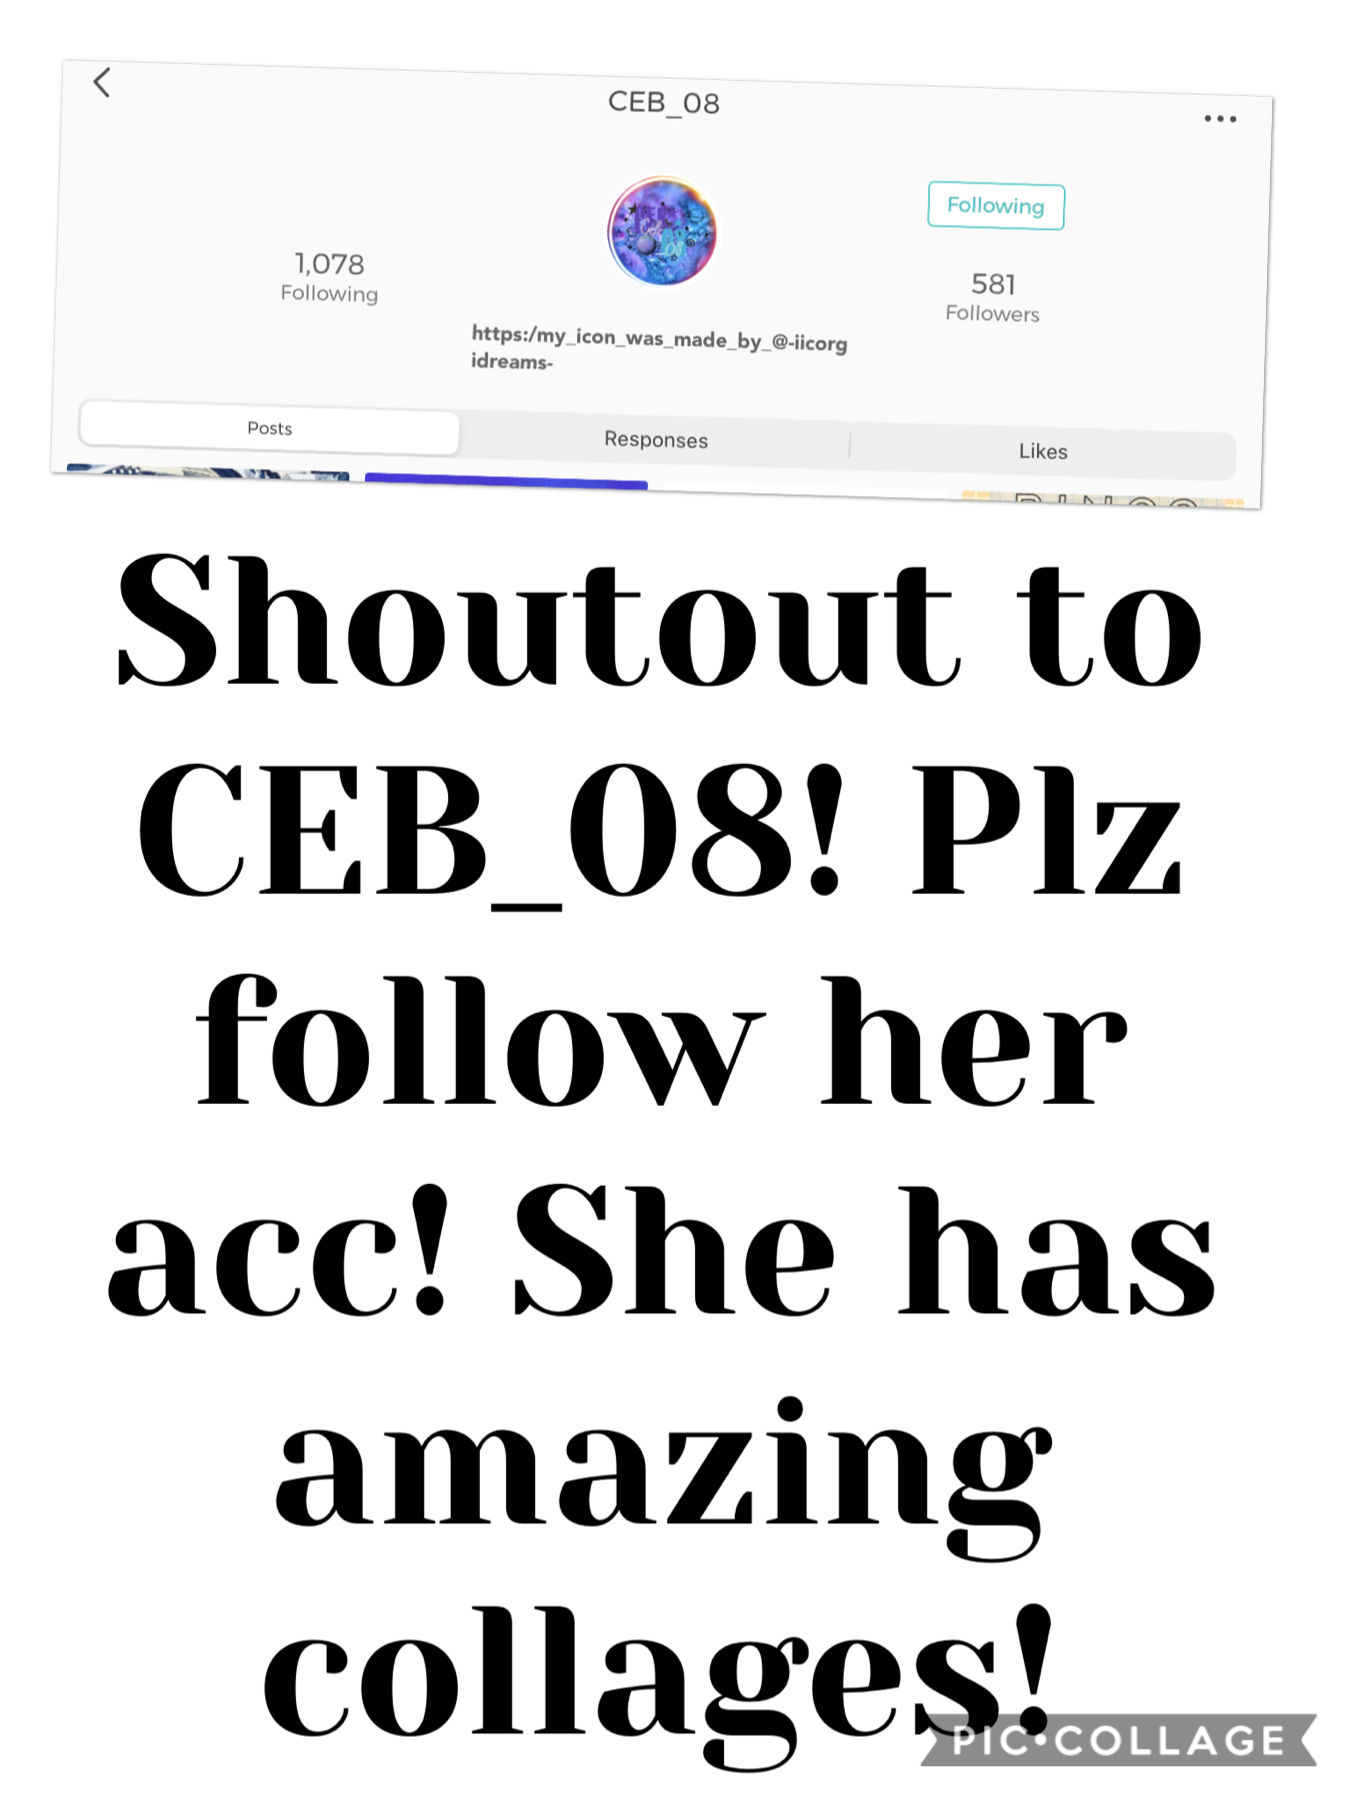 Another shoutout! This time to CEB_08!